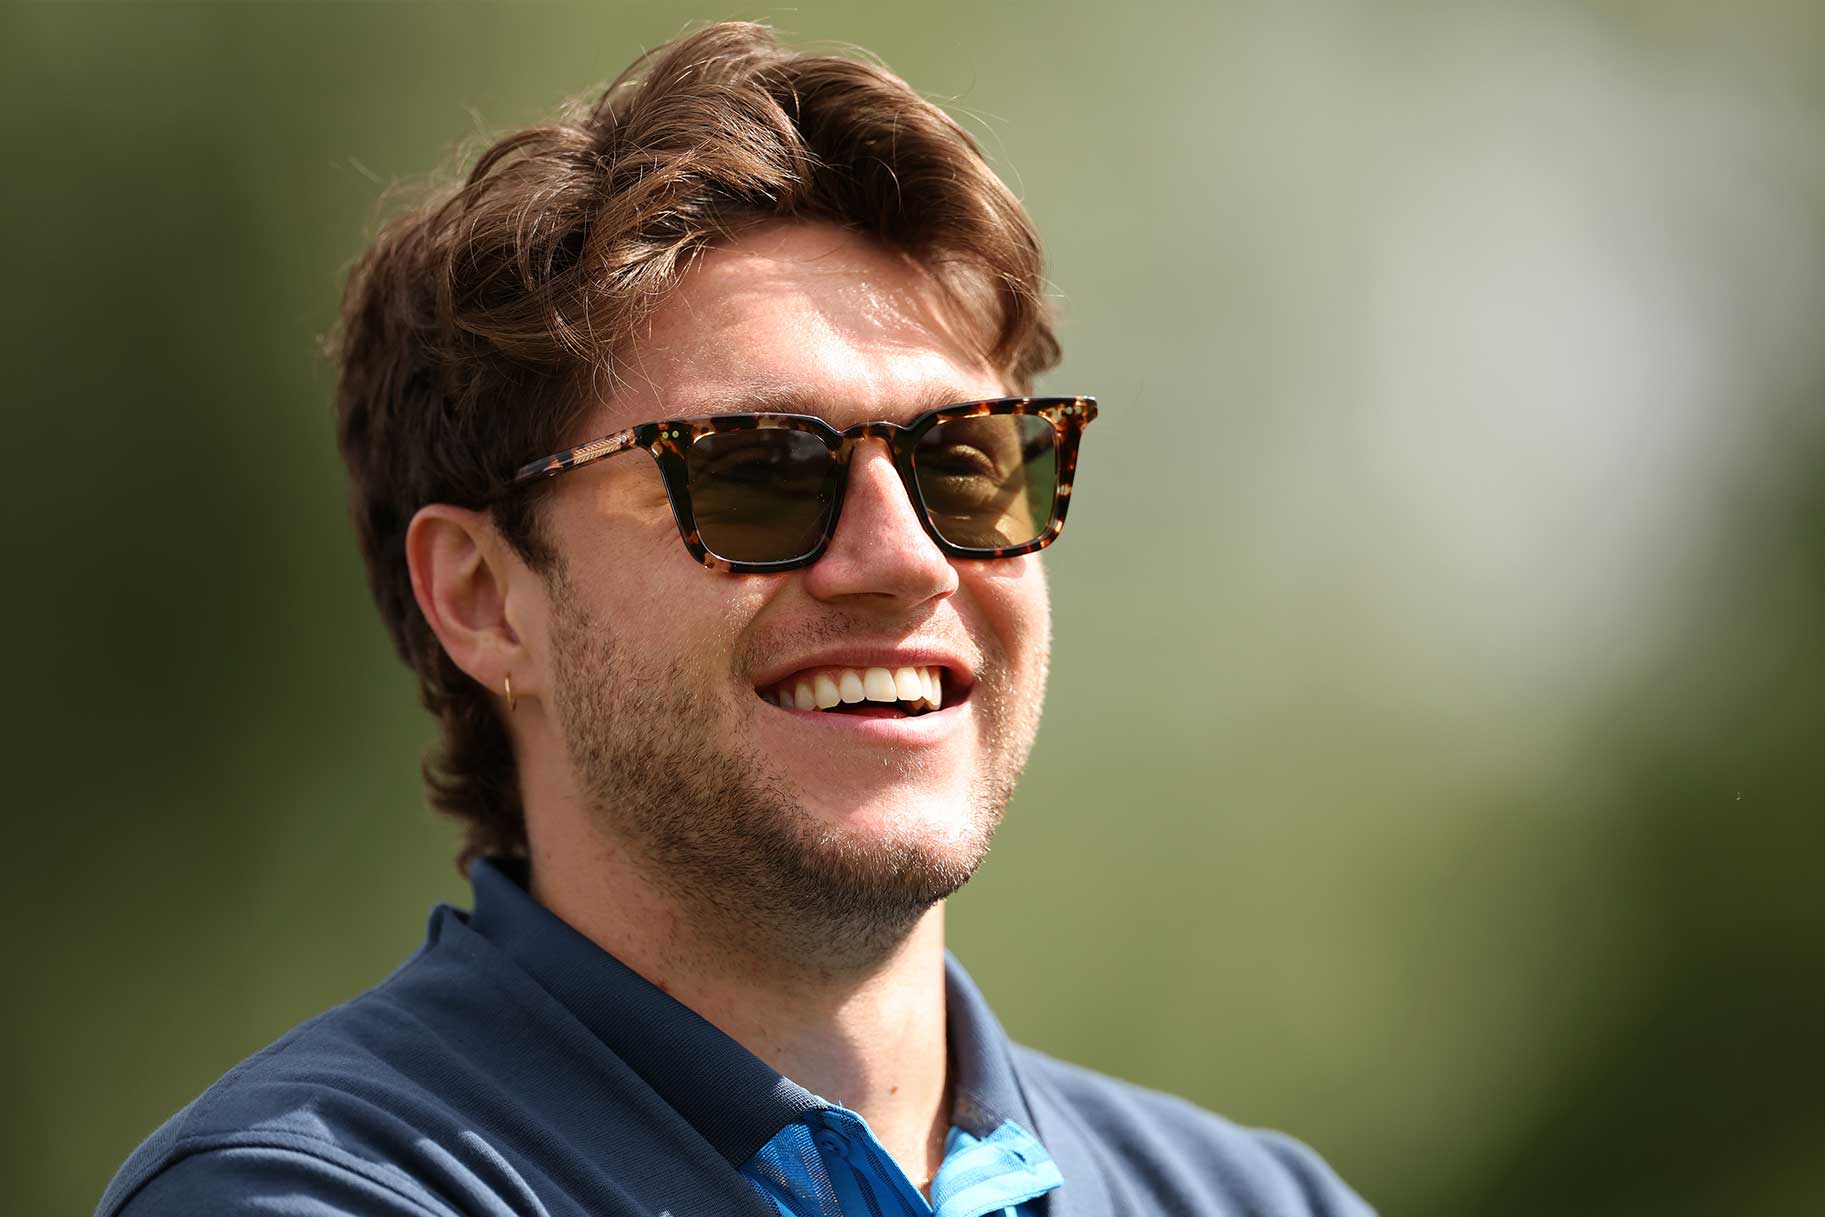 Niall Horan shares a joke at the 11th tee during Day One of the JP McManus Pro-Am at Adare Manor